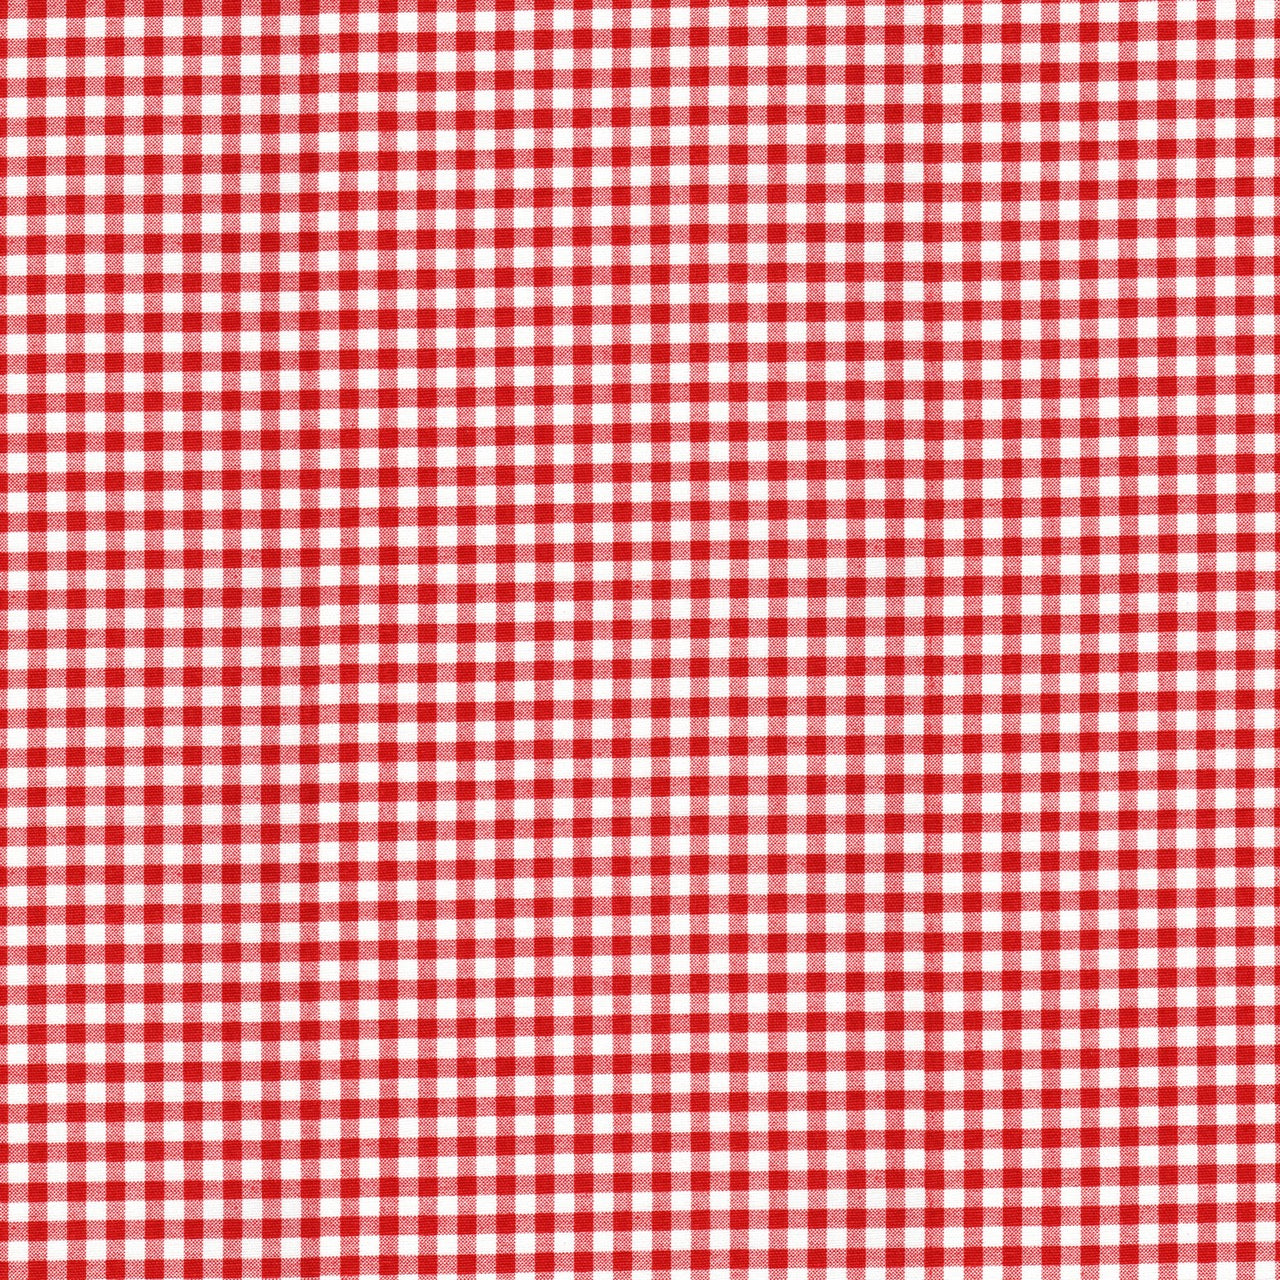 Tailored Valance in Lipstick Red Large Gingham Check on White